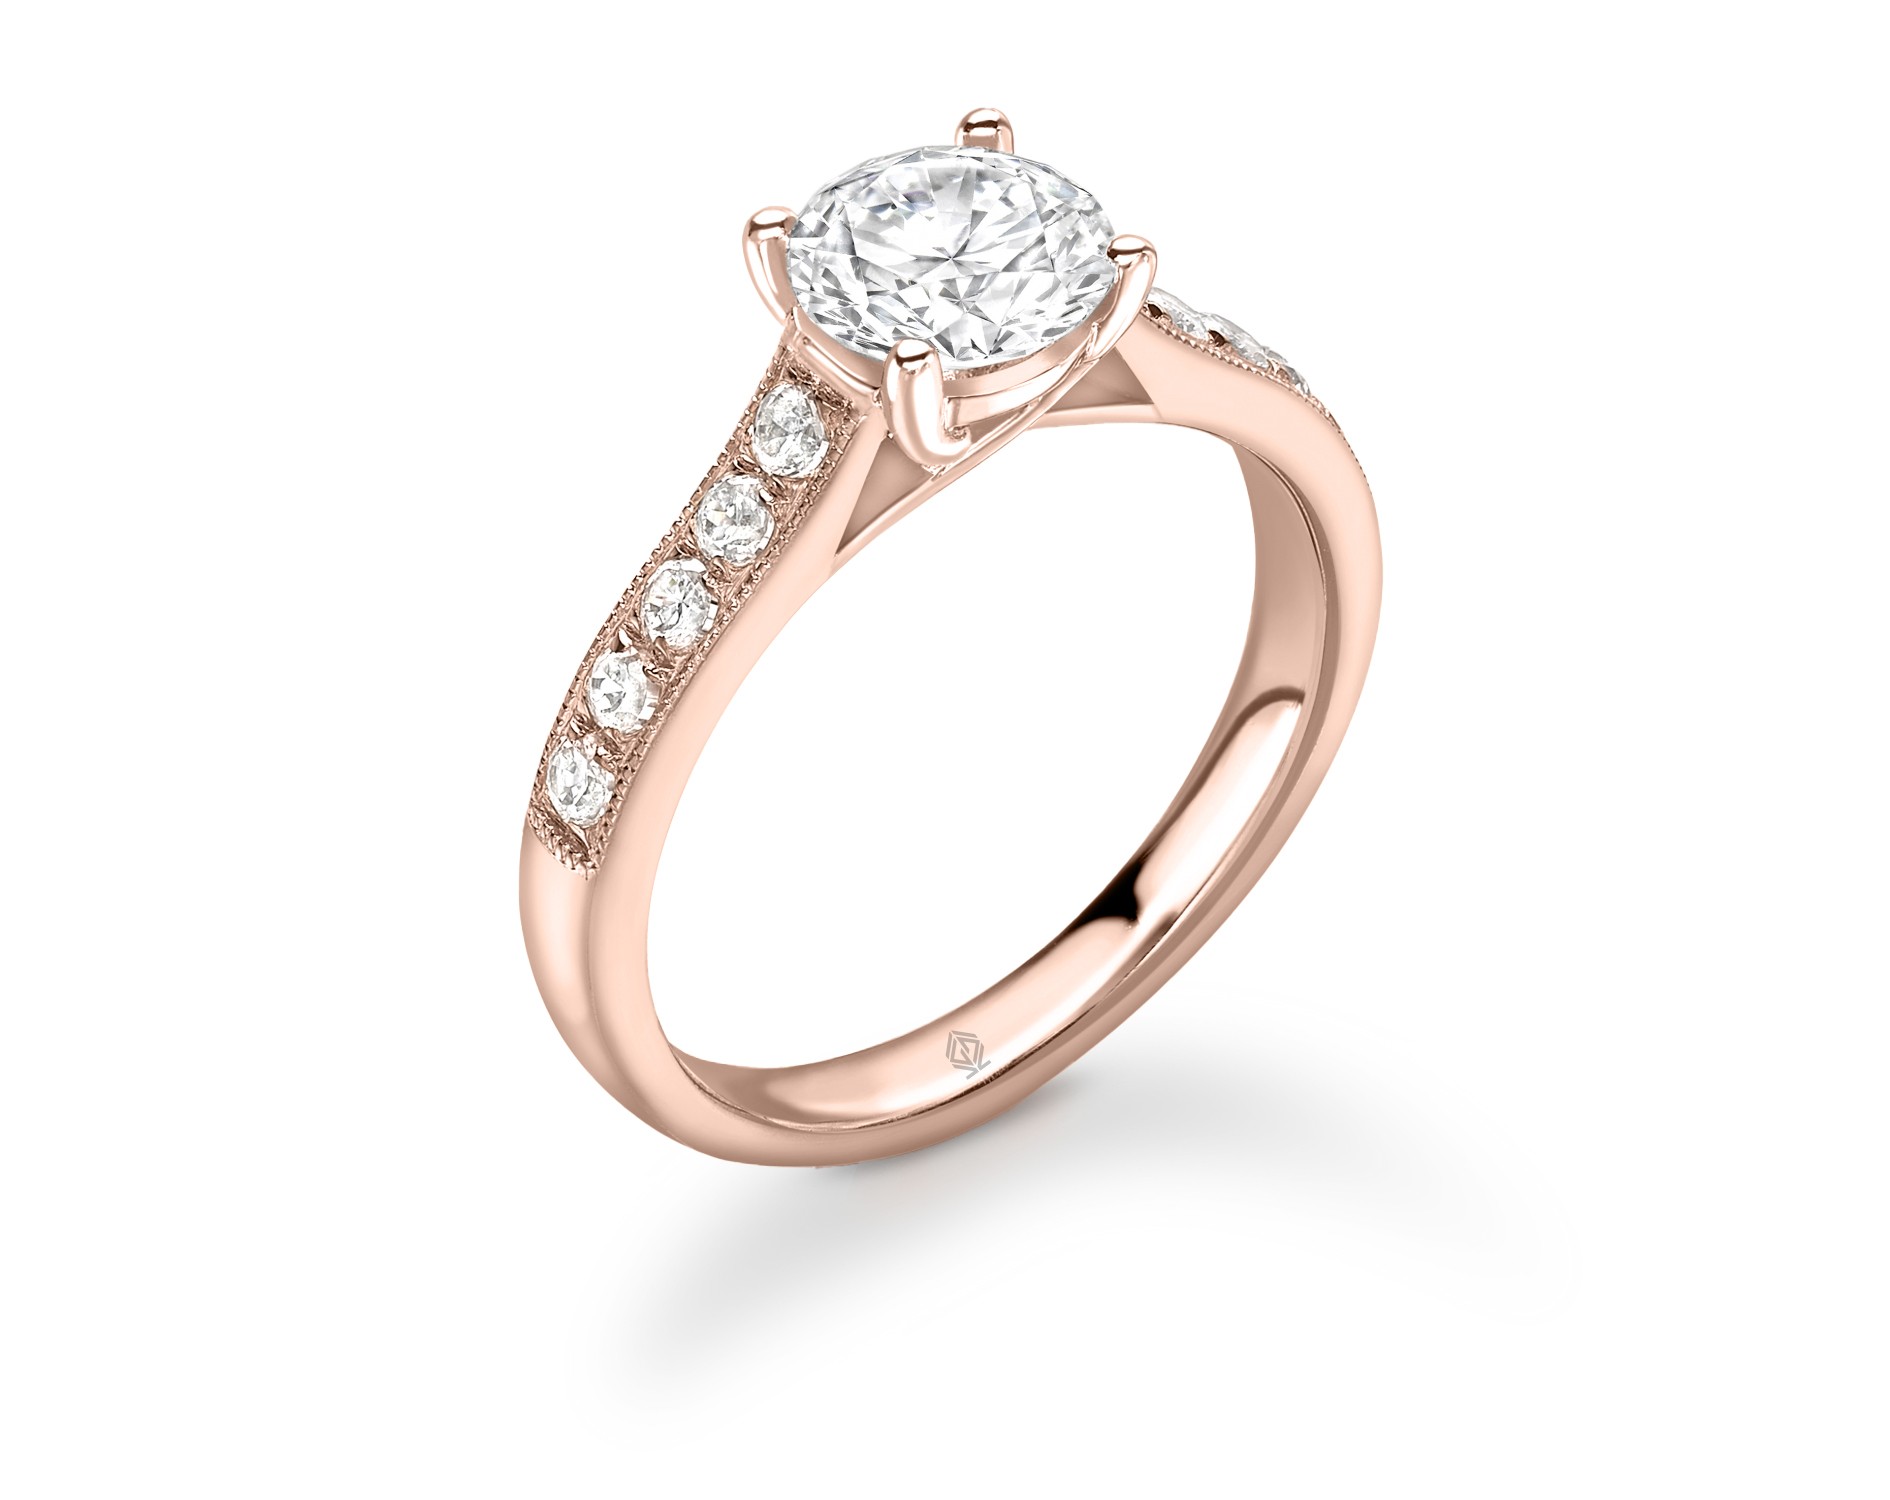 18K ROSE GOLD 4 PRONGS HEAD ROUND CUT DIAMOND ENGAGEMENT RING WITH SIDE STONES MILGRAIN CHANNEL SET